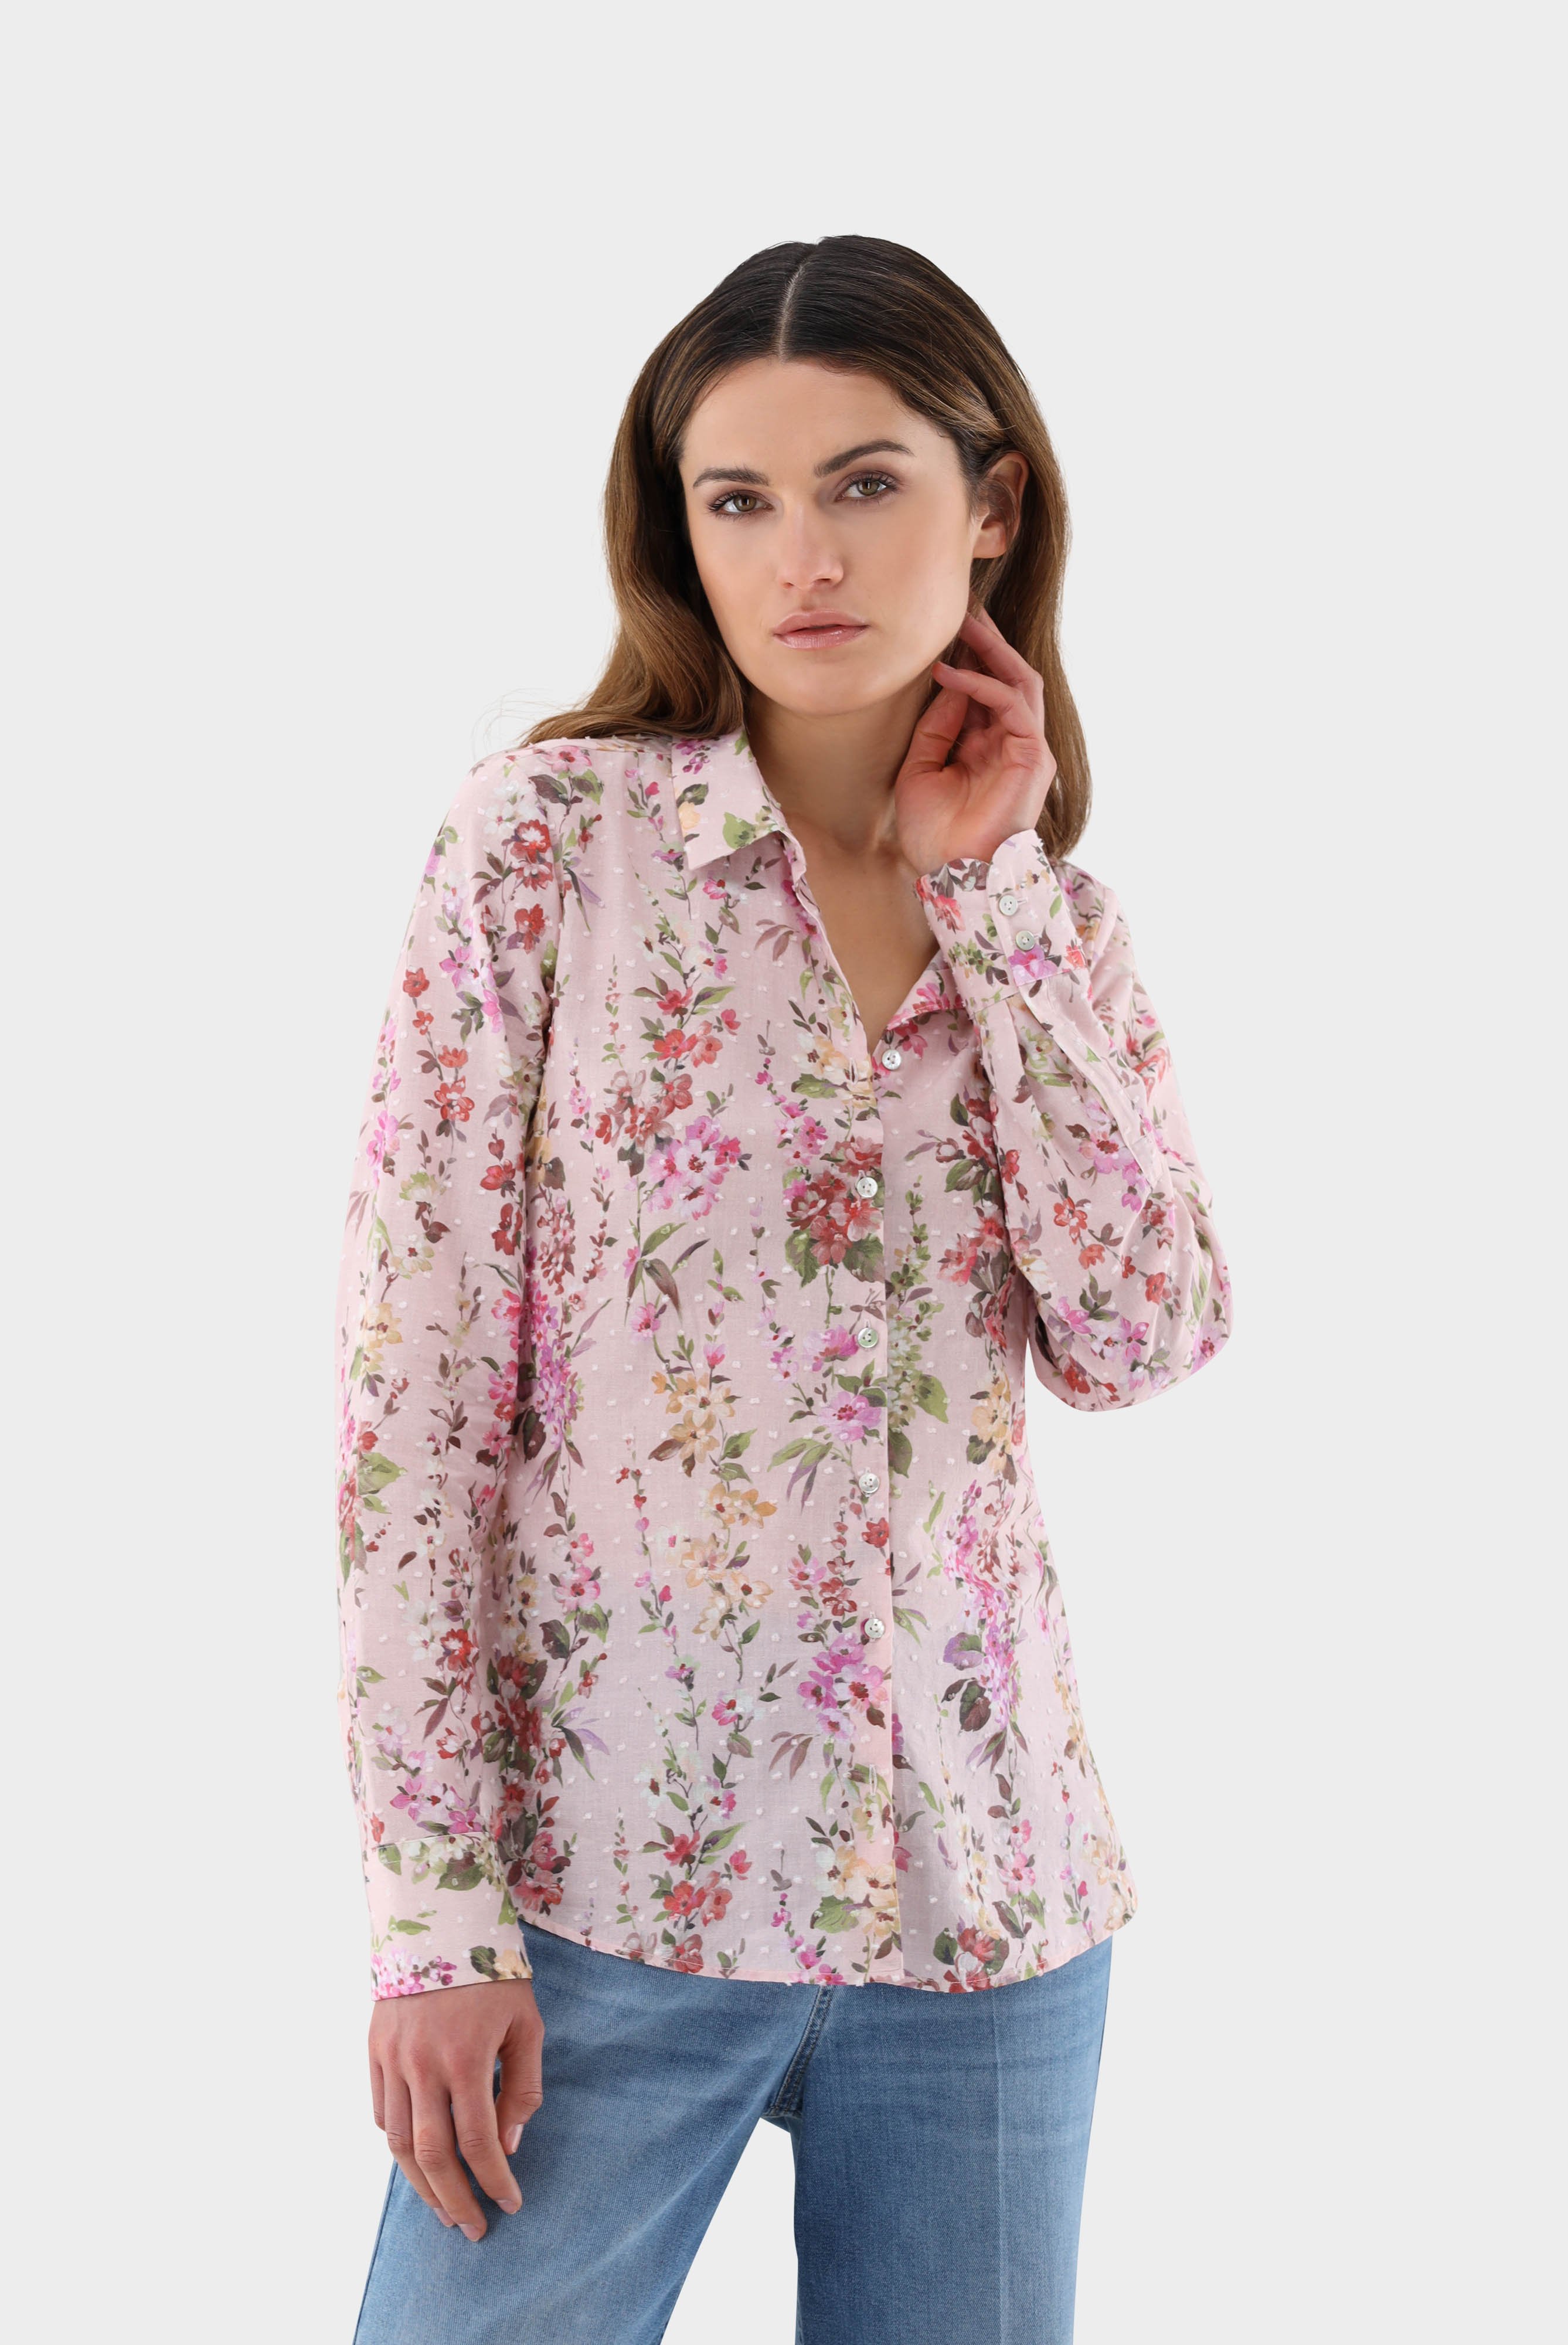 fitted Blouse with floral Print